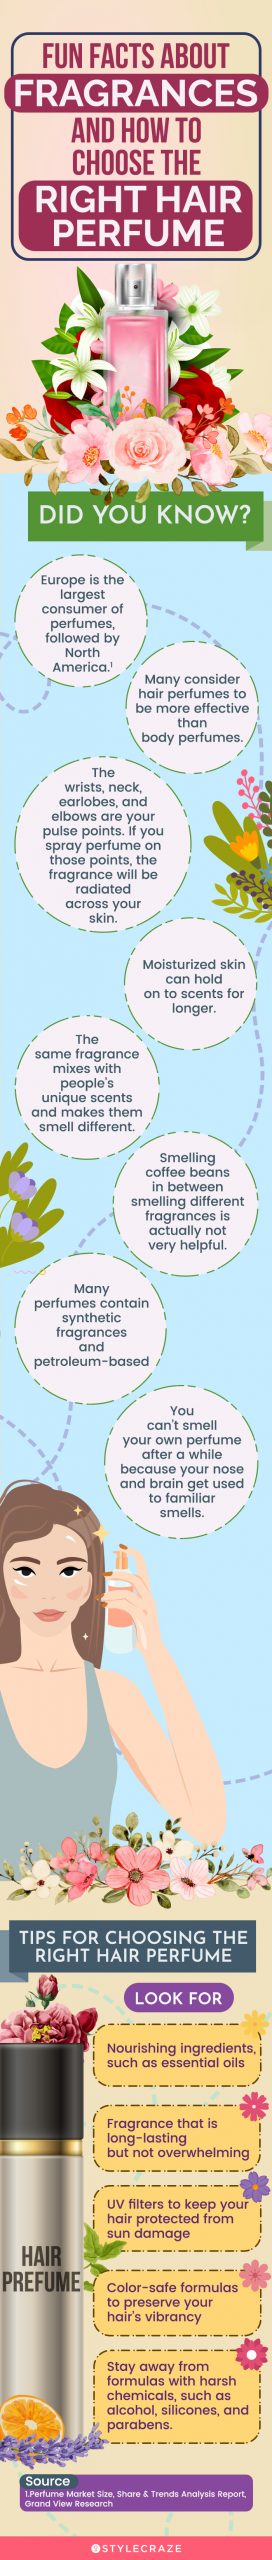 Facts About Fragrances And How To Choose The Right Hair Perfume [infographic]